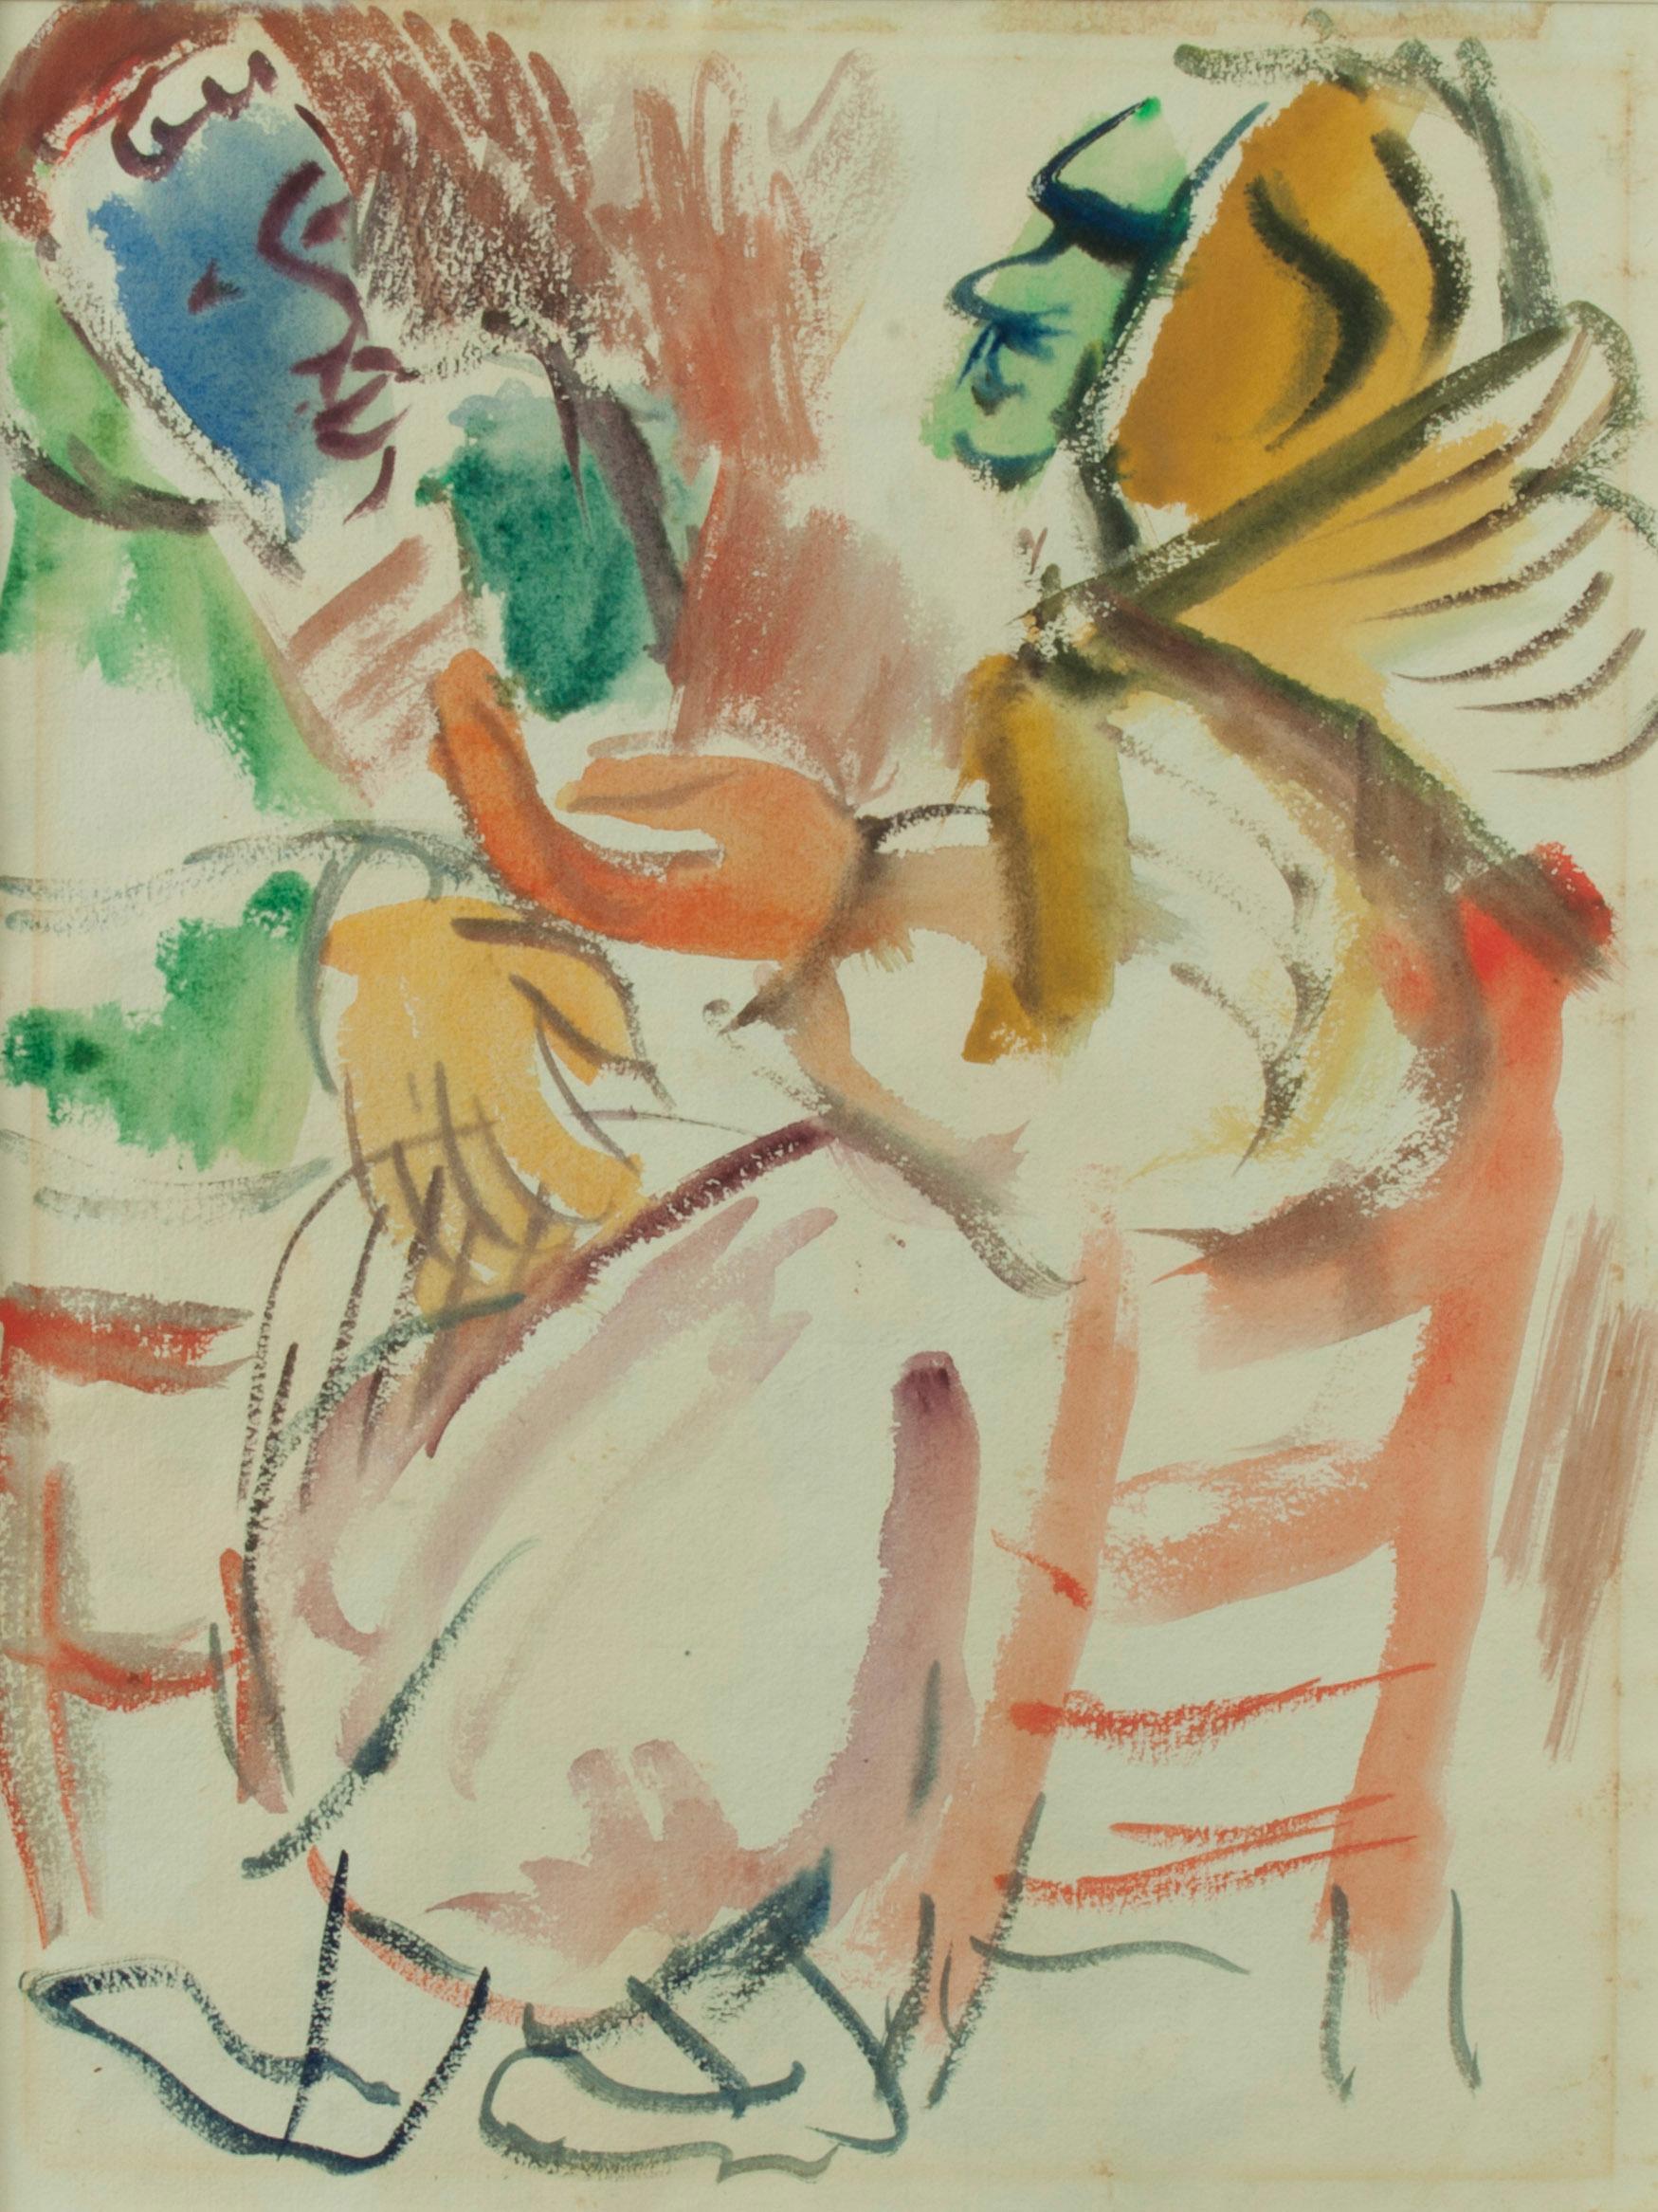 Untitled (Double sided watercolor)  Recto: Figures seated at a table  - Art by Ben Shahn